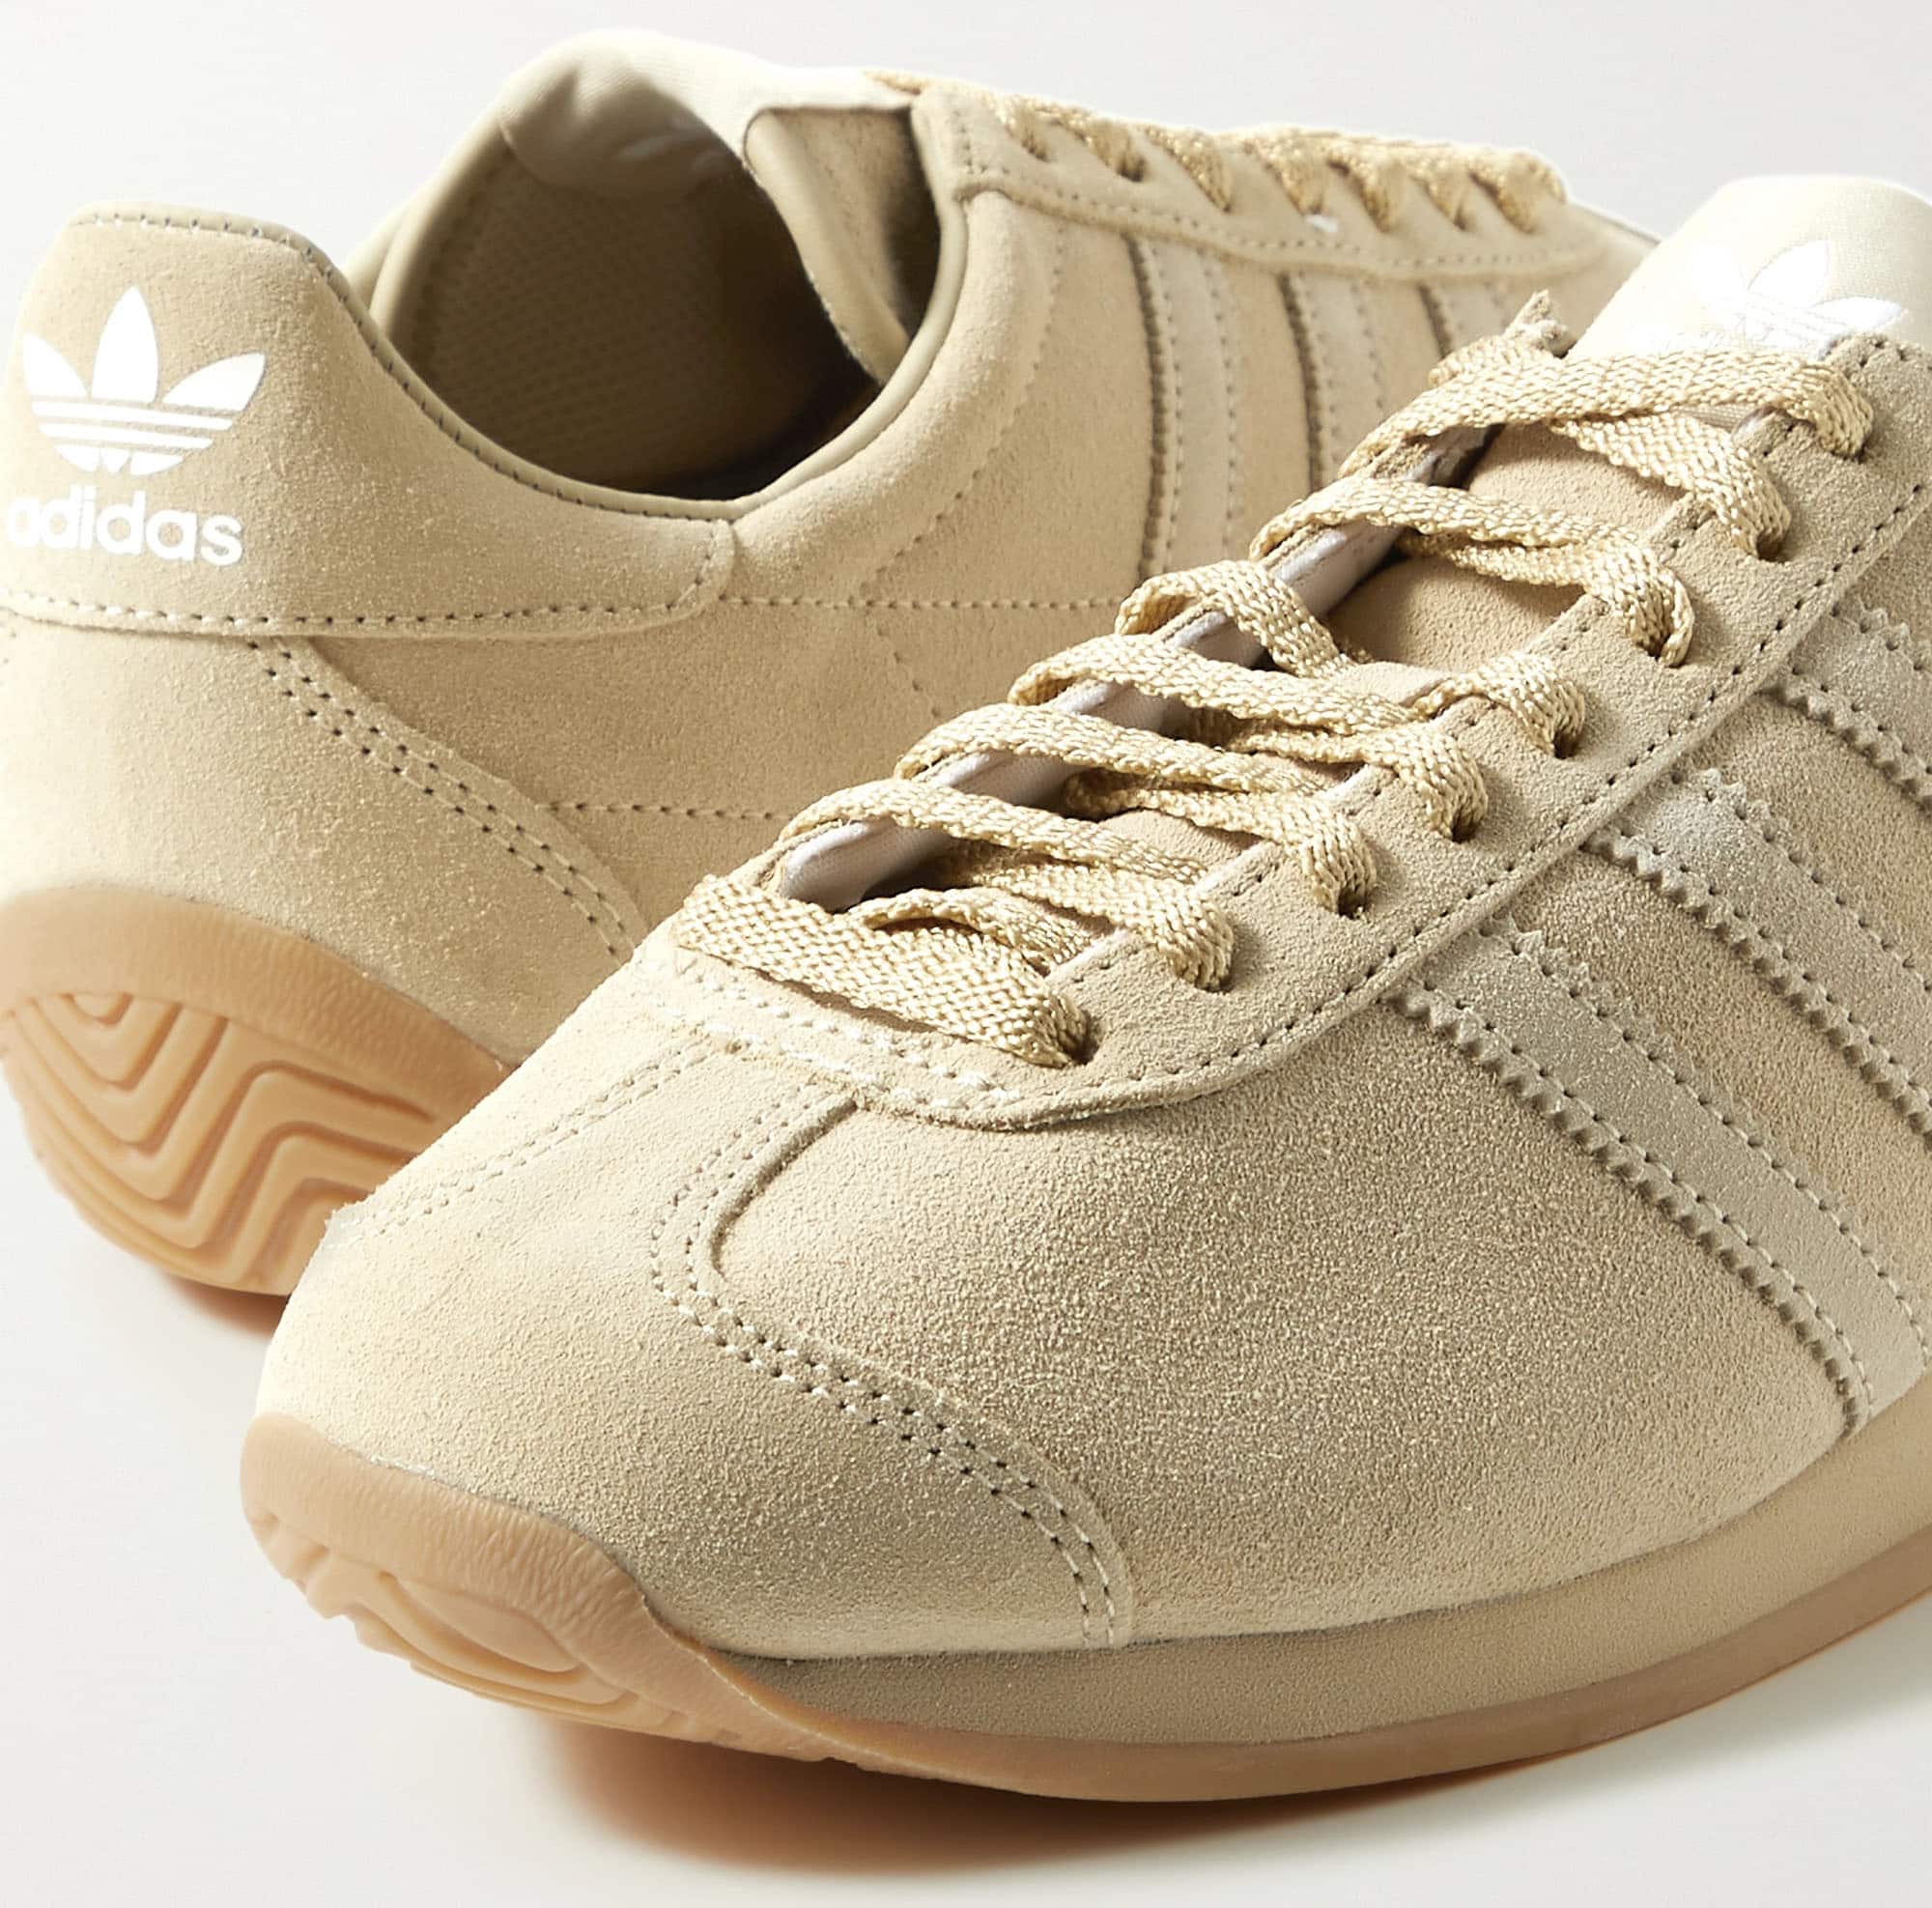 This Khaite x Adidas collaboration features the sports giant's classic running style done in ecru suede material